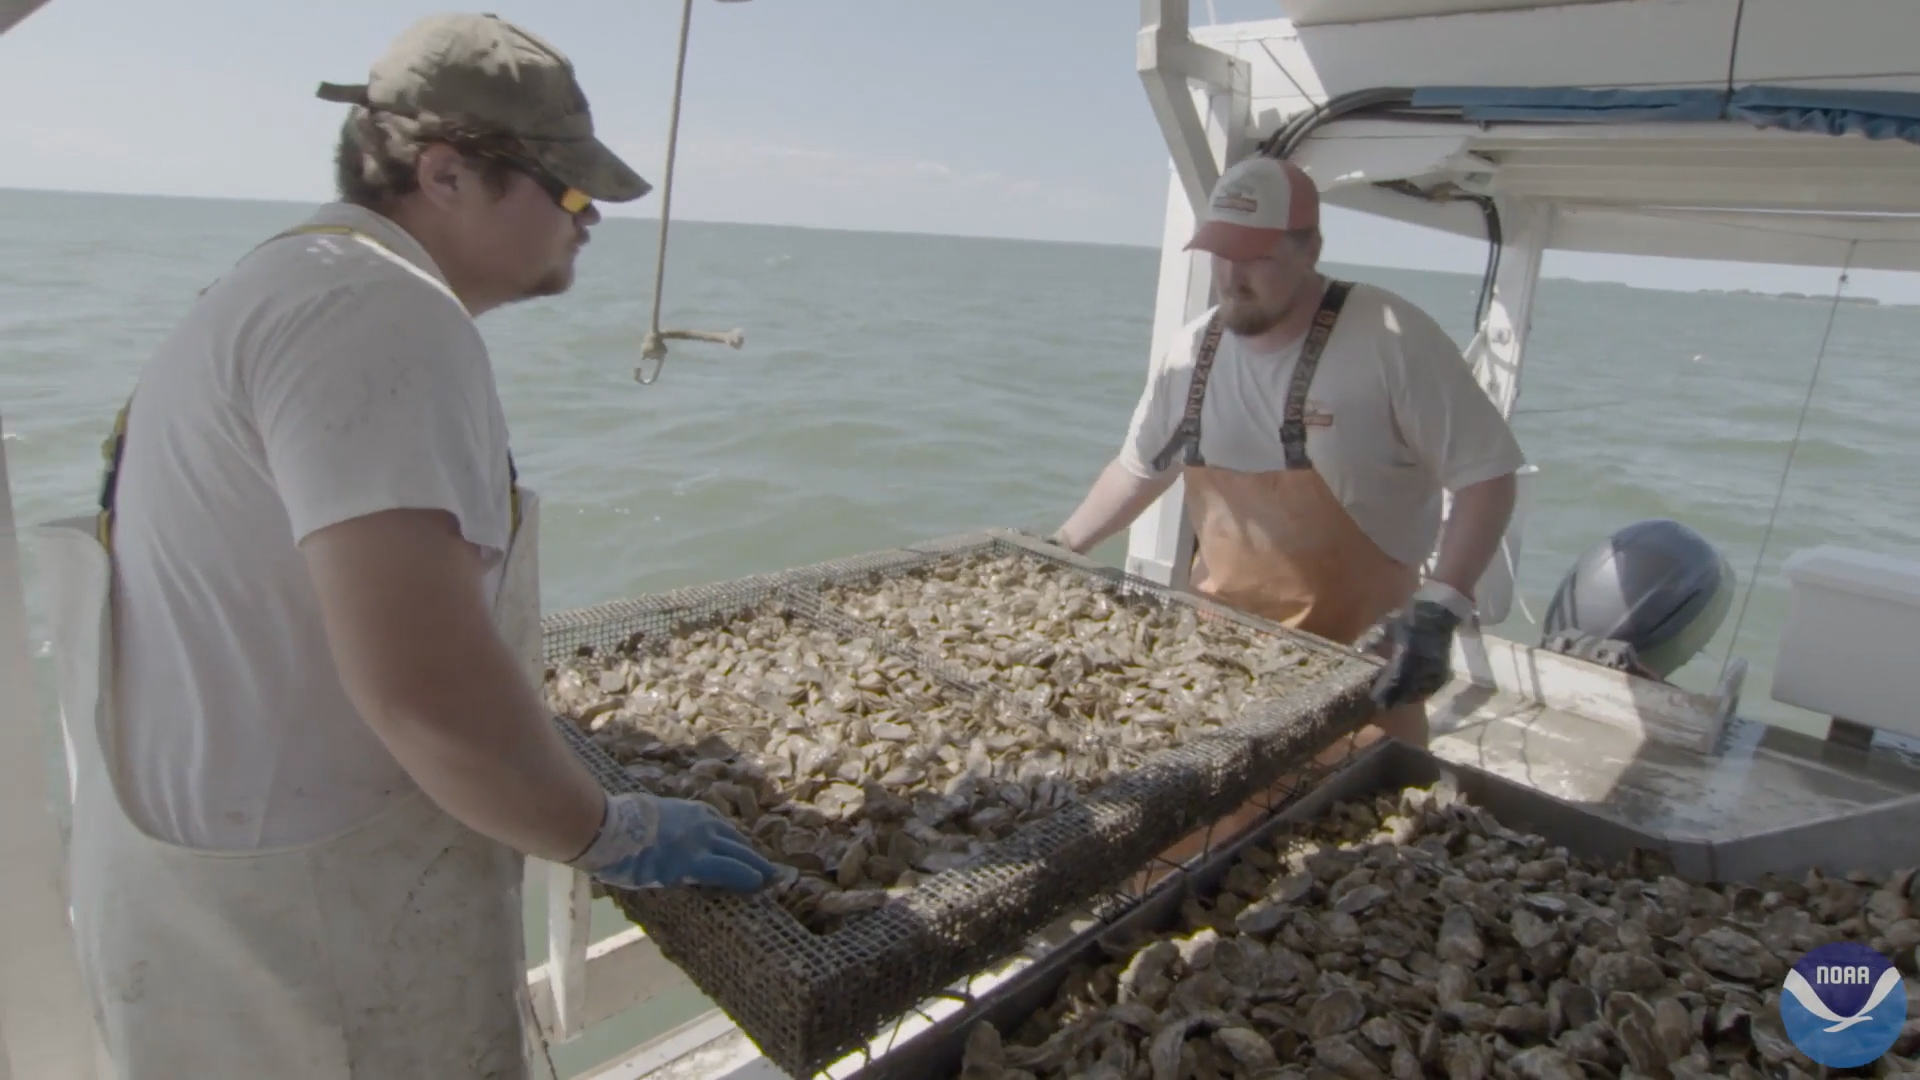 Oyster growers harvest oysters from Chesapeake Bay.